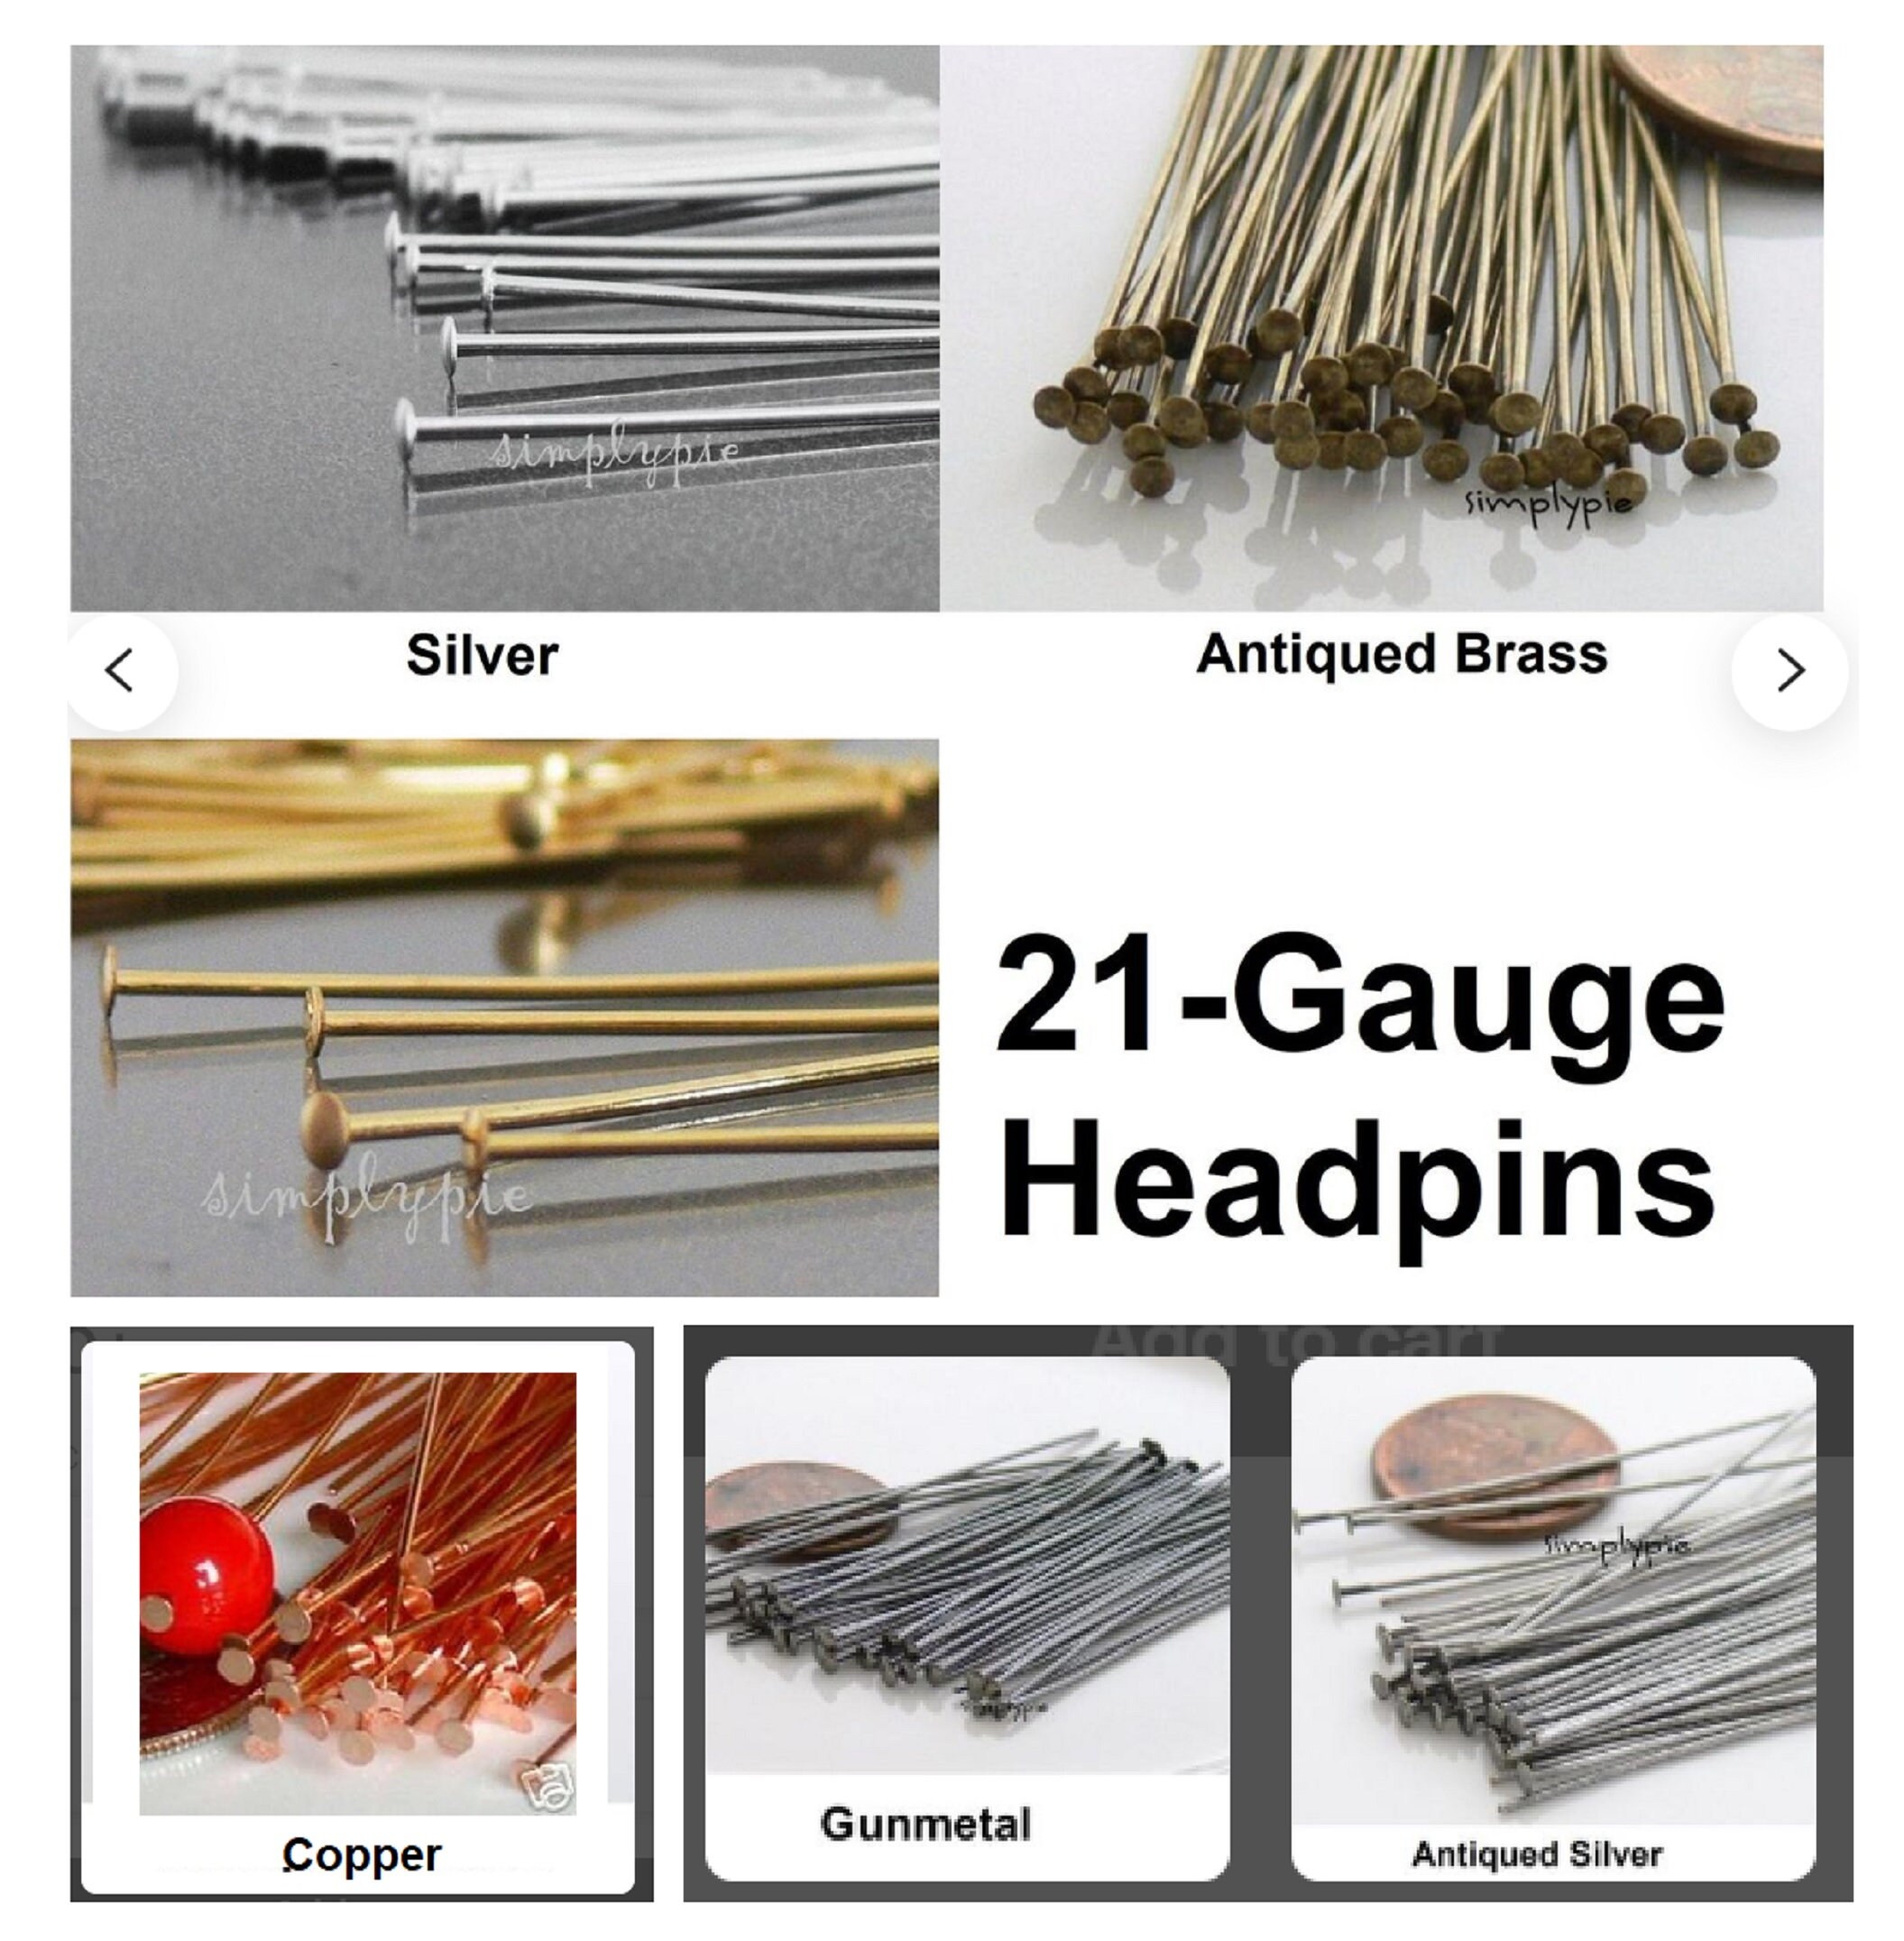 100 Flat Head Pins Silver, Gold, Antique Silver, Antique Gold